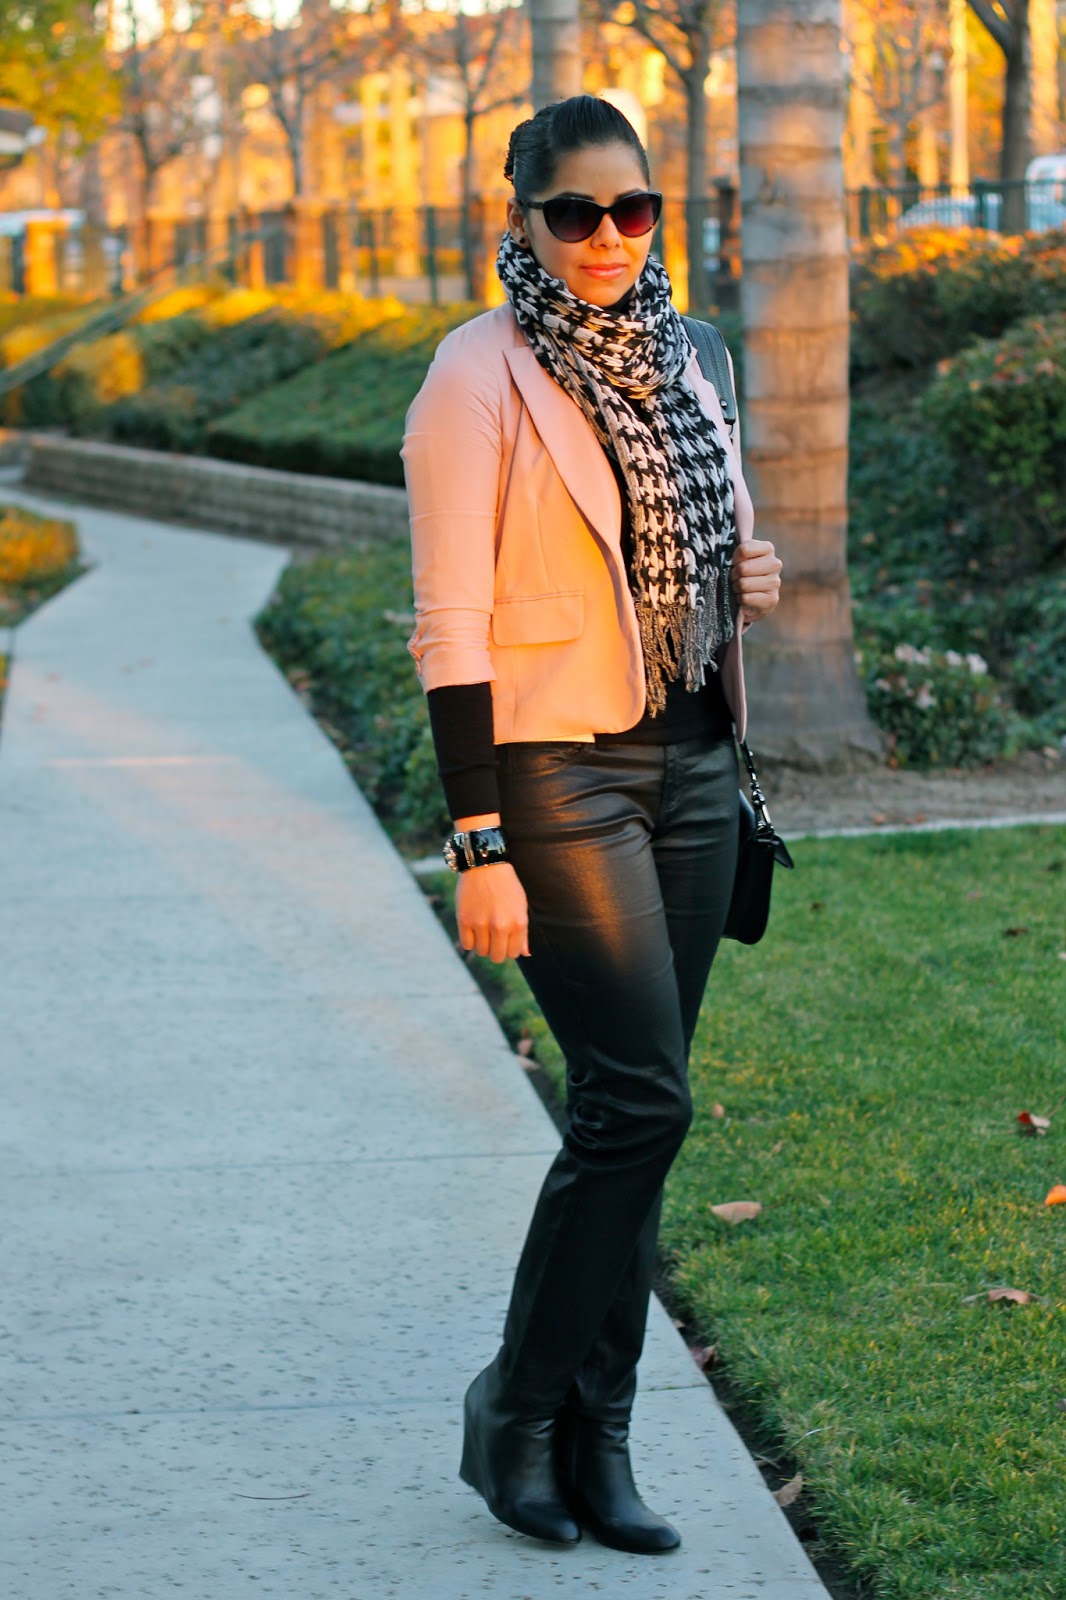 Rose, Houndstooth & Leather - Lil bits of Chic